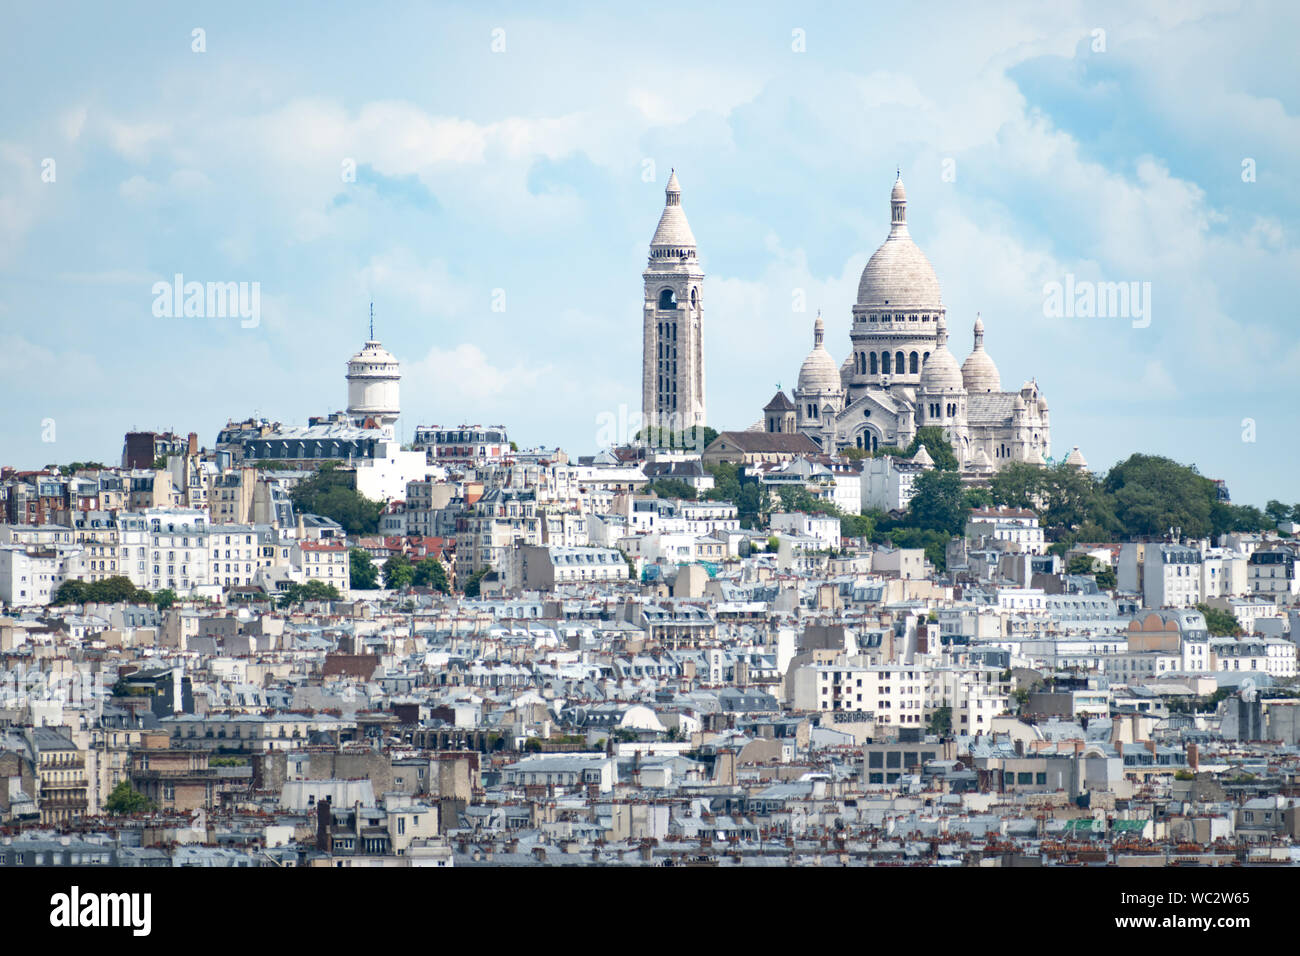 View of the Sacré-Cœur at the top of Montmartre Hill in Paris, France, on a bright cloudy day, with buildings in the foreground. Stock Photo